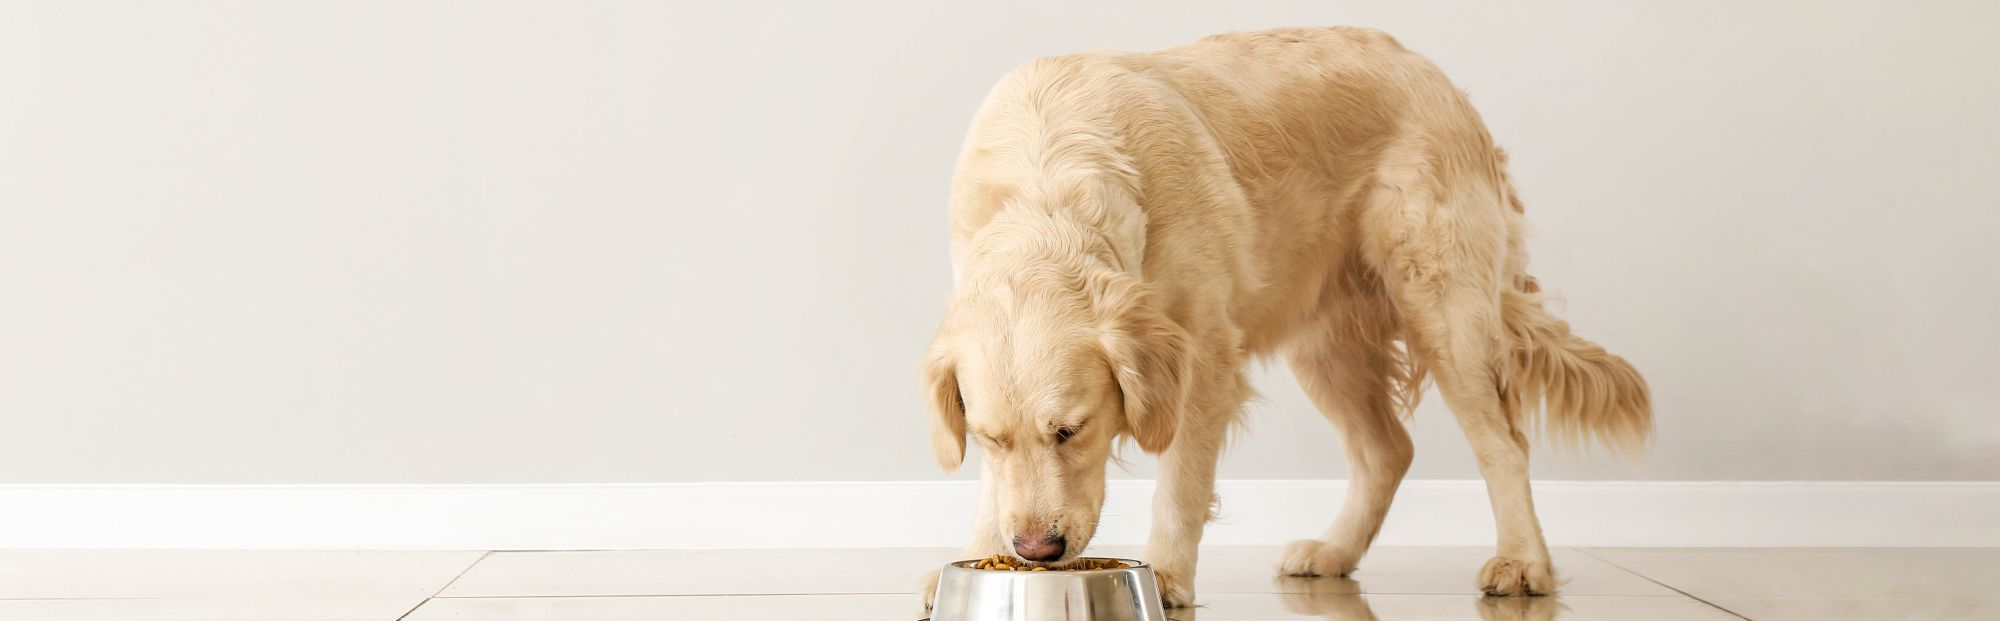 Concept for Life Veterinary Diet Dog Renal